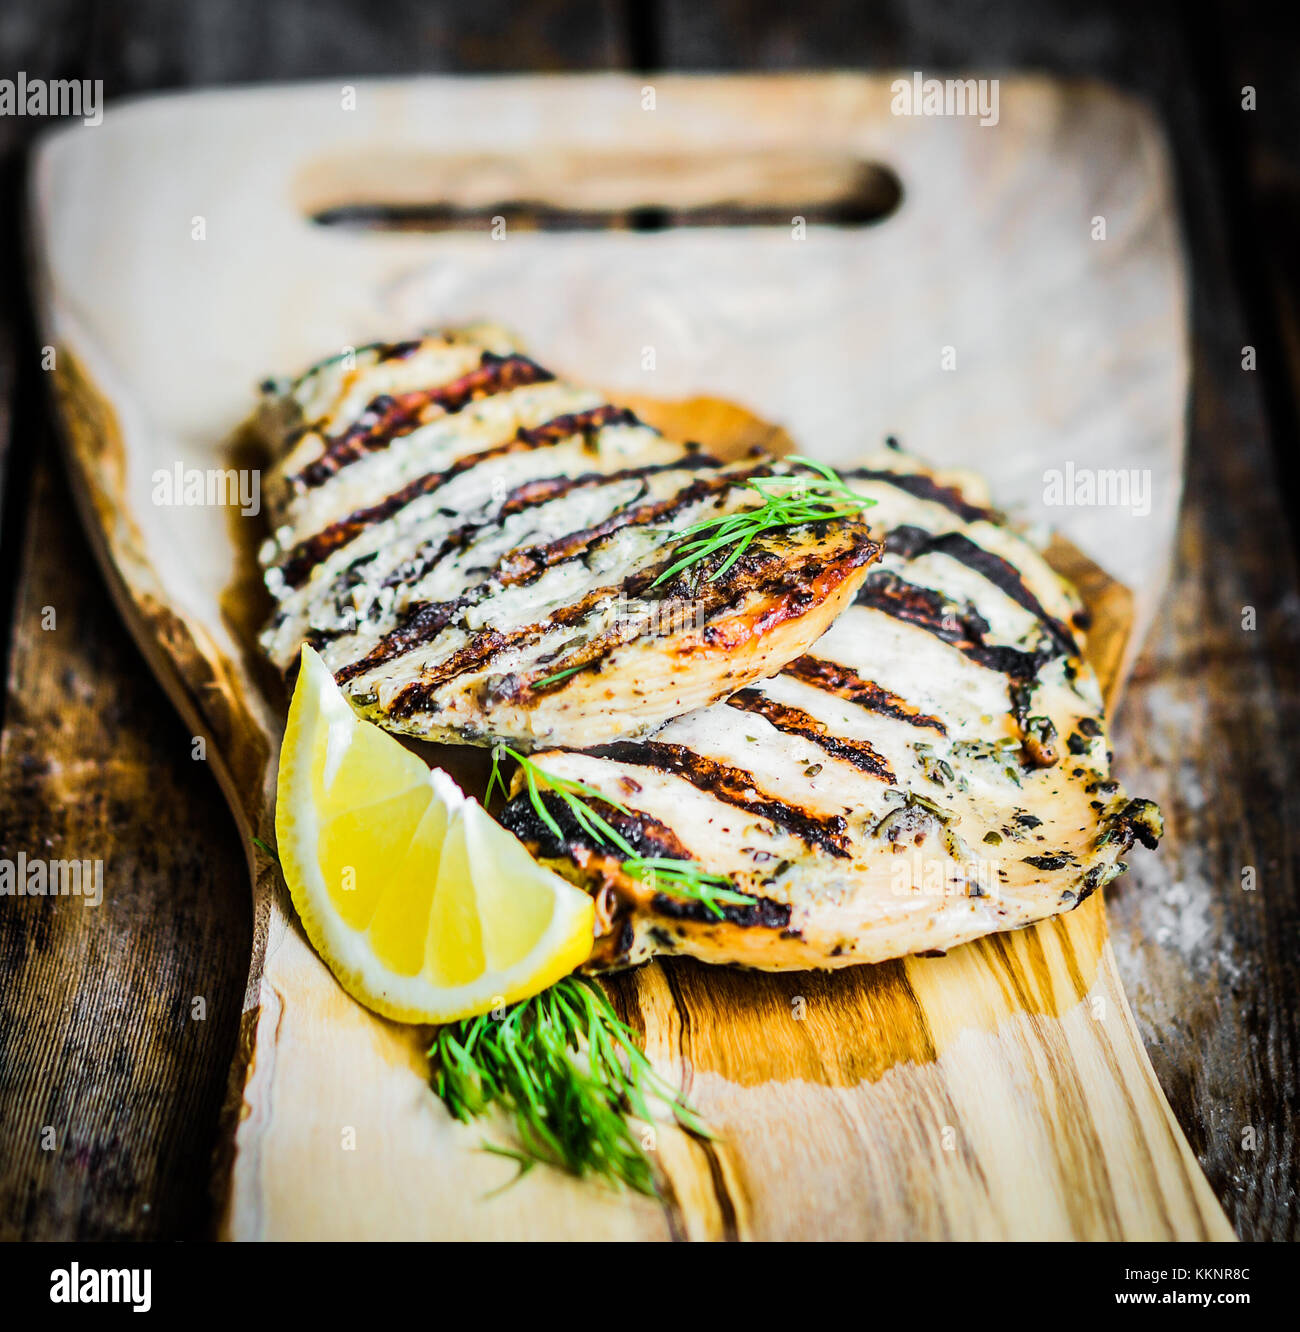 Grilled Chicken With Herbs And Lemon On Wooden Background Stock Photo